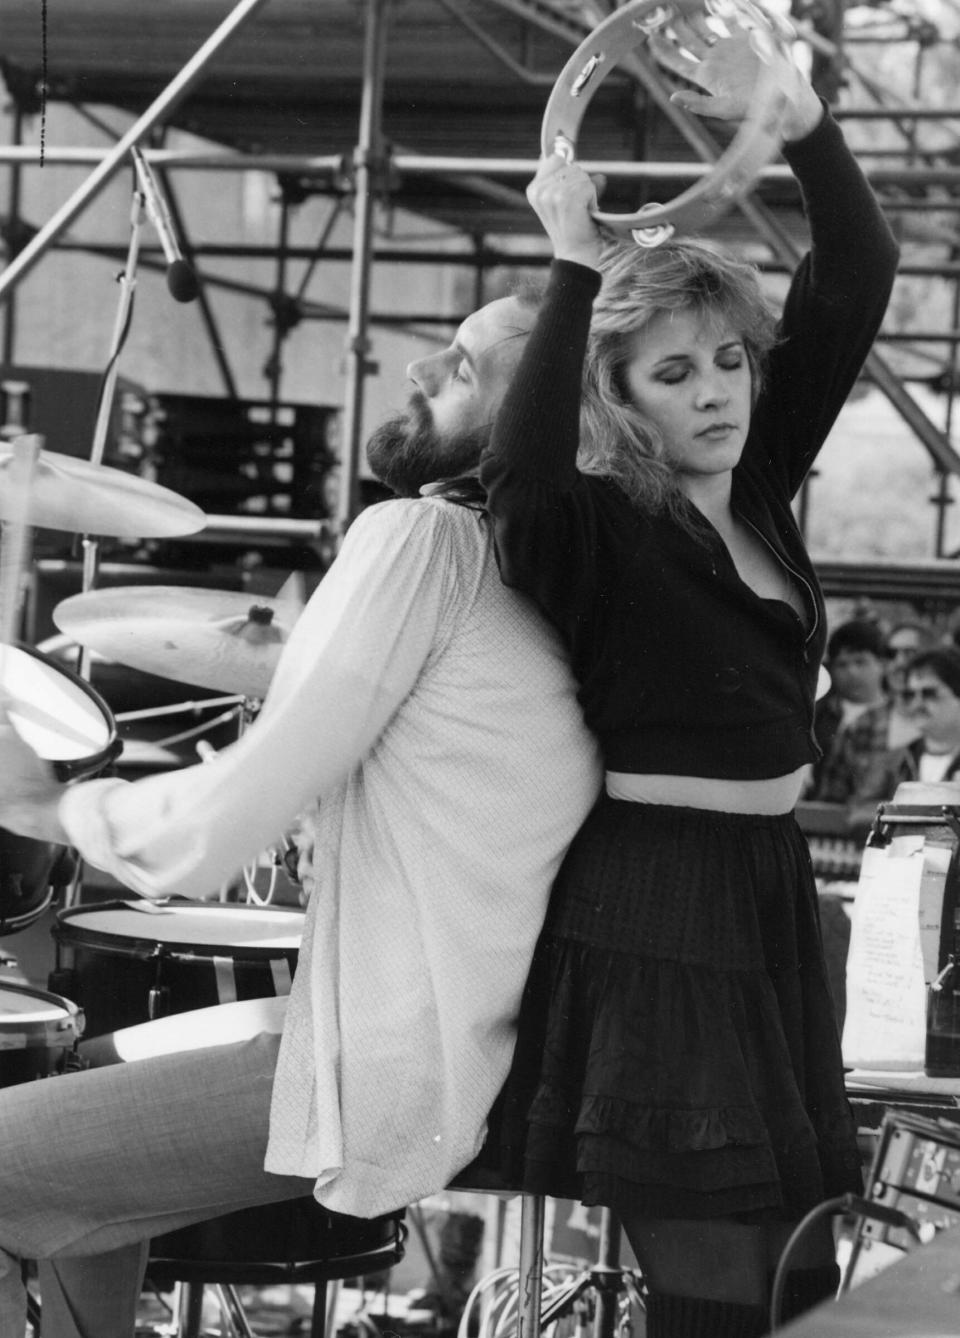 Nicks and Mick Fleetwood at the Rock &rsquo;N Run benefit at UCLA in April 1983.